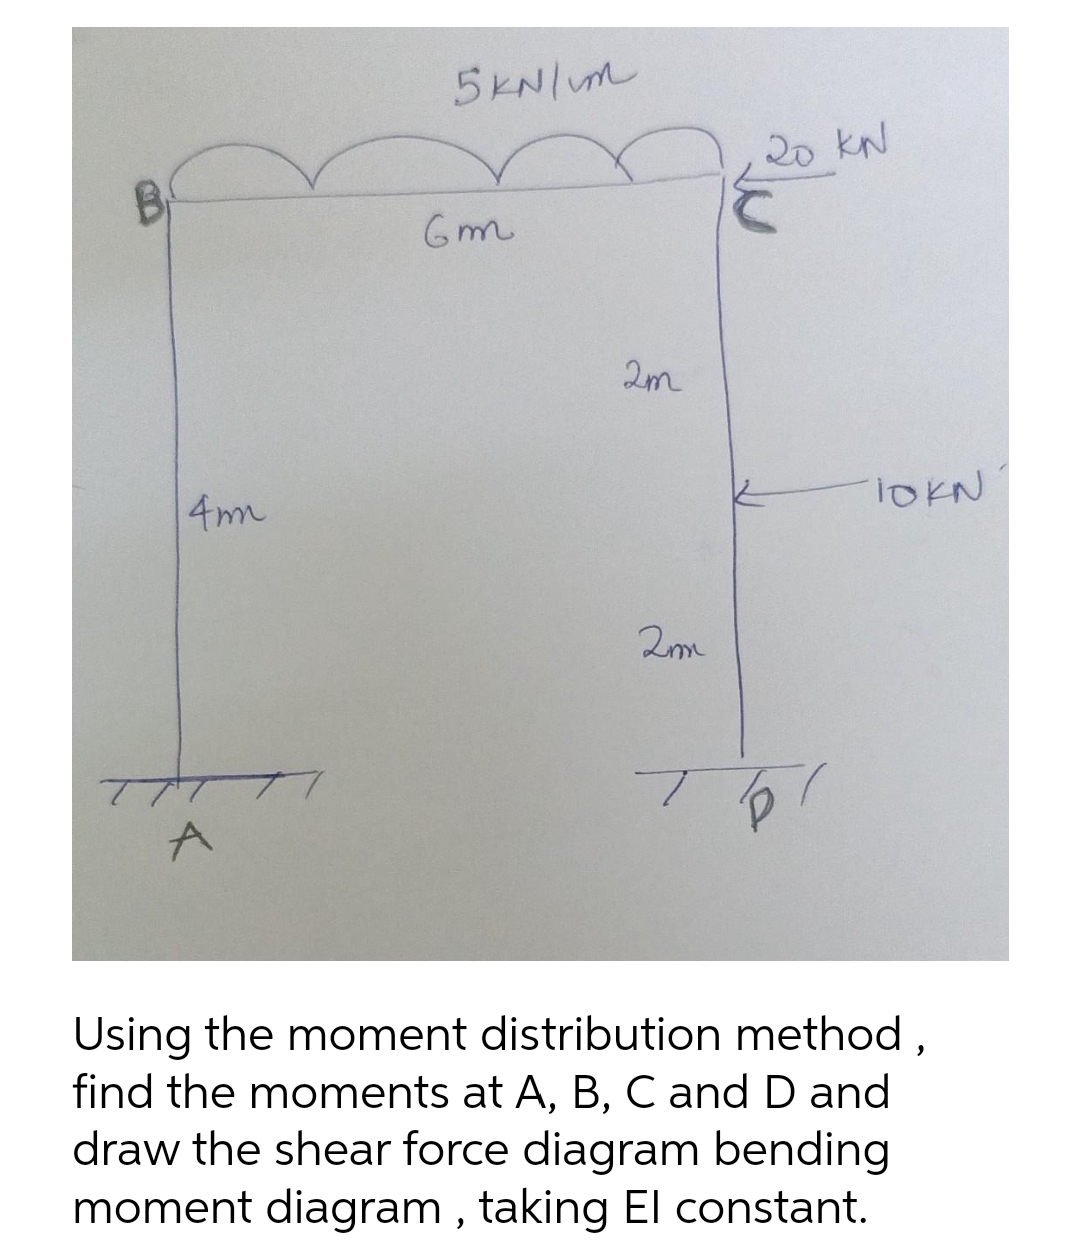 4mm
A
5kN/m
Gm
2m
2m
20 KN
TO!
TOKN
Using the moment distribution method,
find the moments at A, B, C and D and
draw the shear force diagram bending
moment diagram, taking El constant.